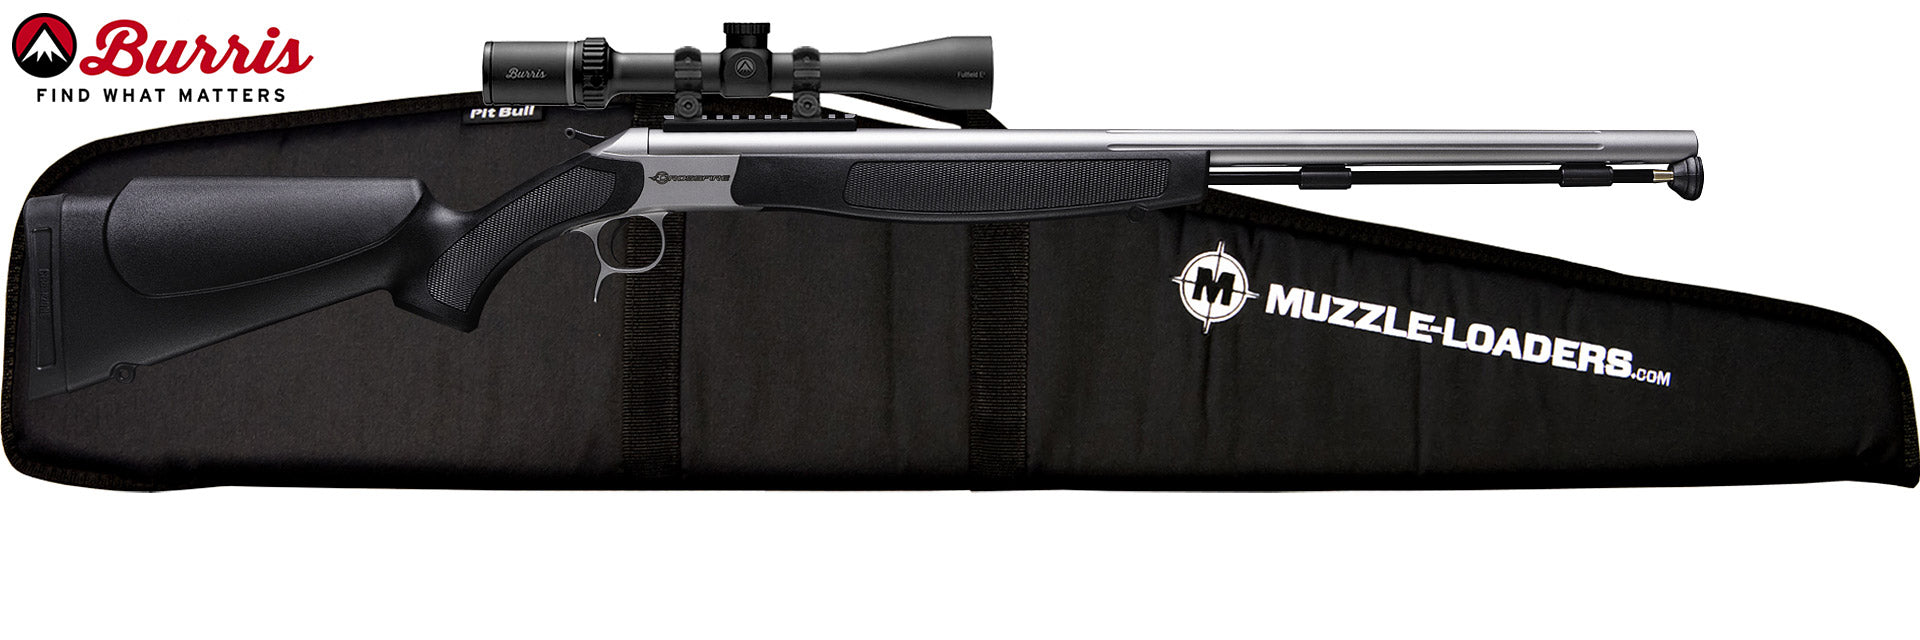 CVA Crossfire Black & Stainless With Burris Muzzleloader Scope - Soft Case